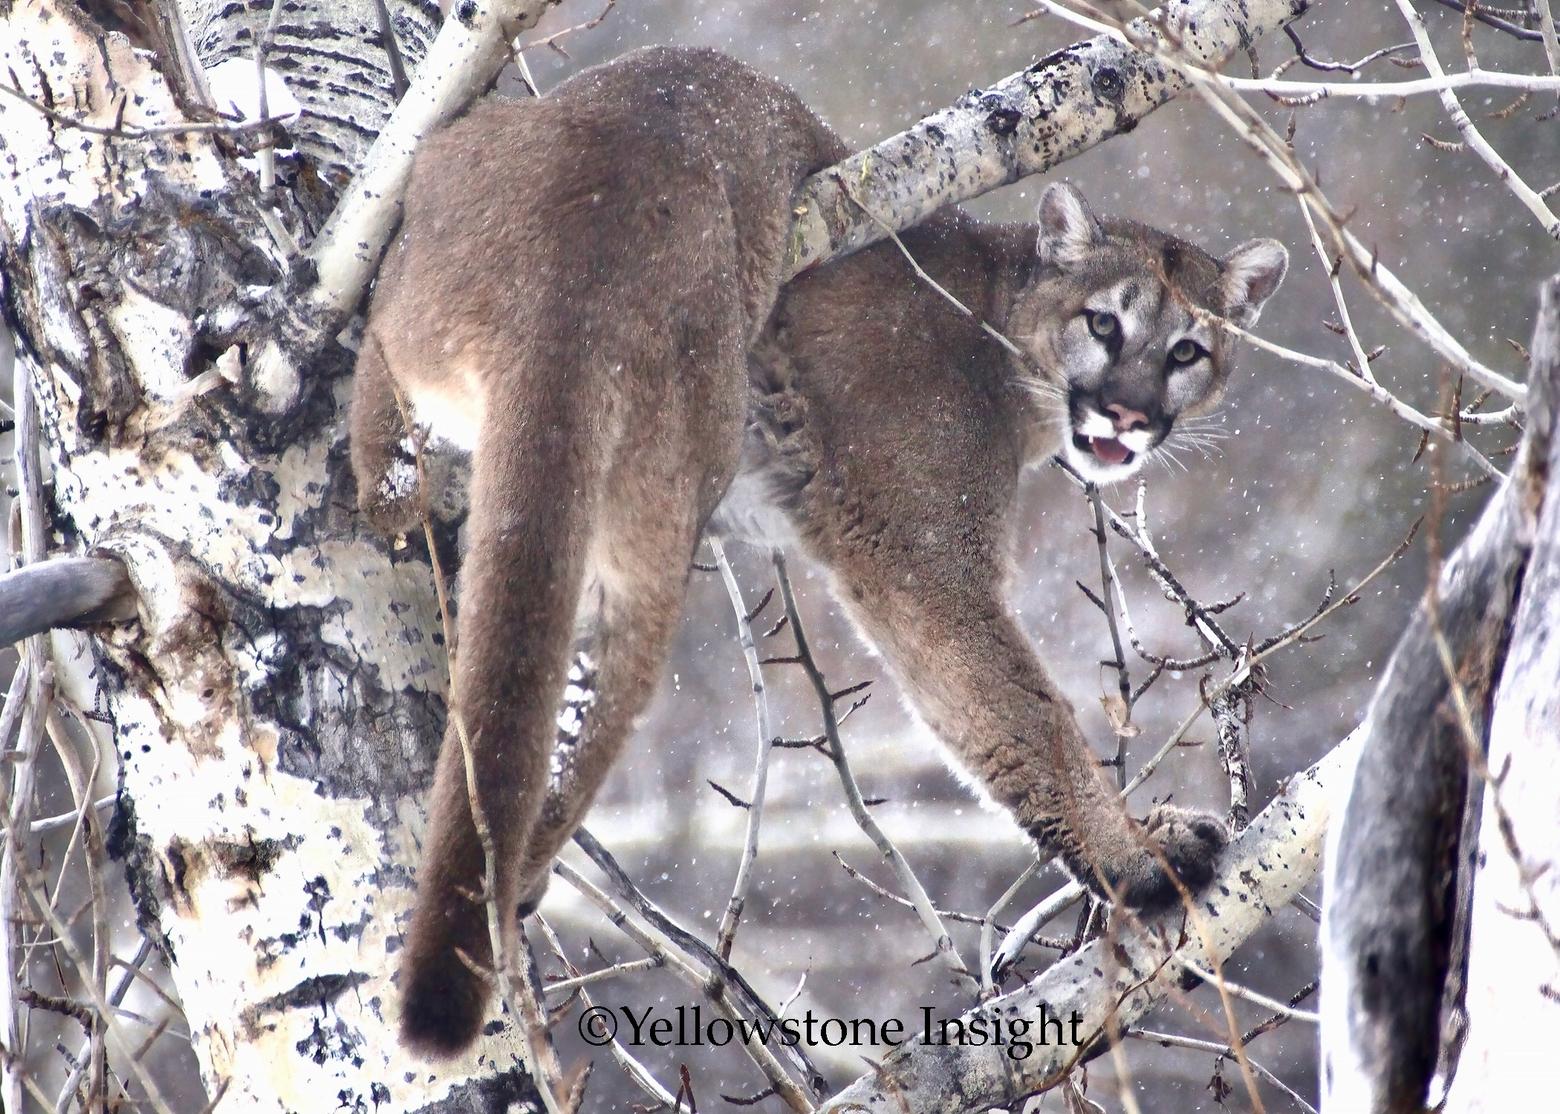 A mountain lion turns to the author's camera. Many of MacNeil Lyons' 35 cougar sightings have come in winter when it's easier to track pawprints and see mountain lion sign.